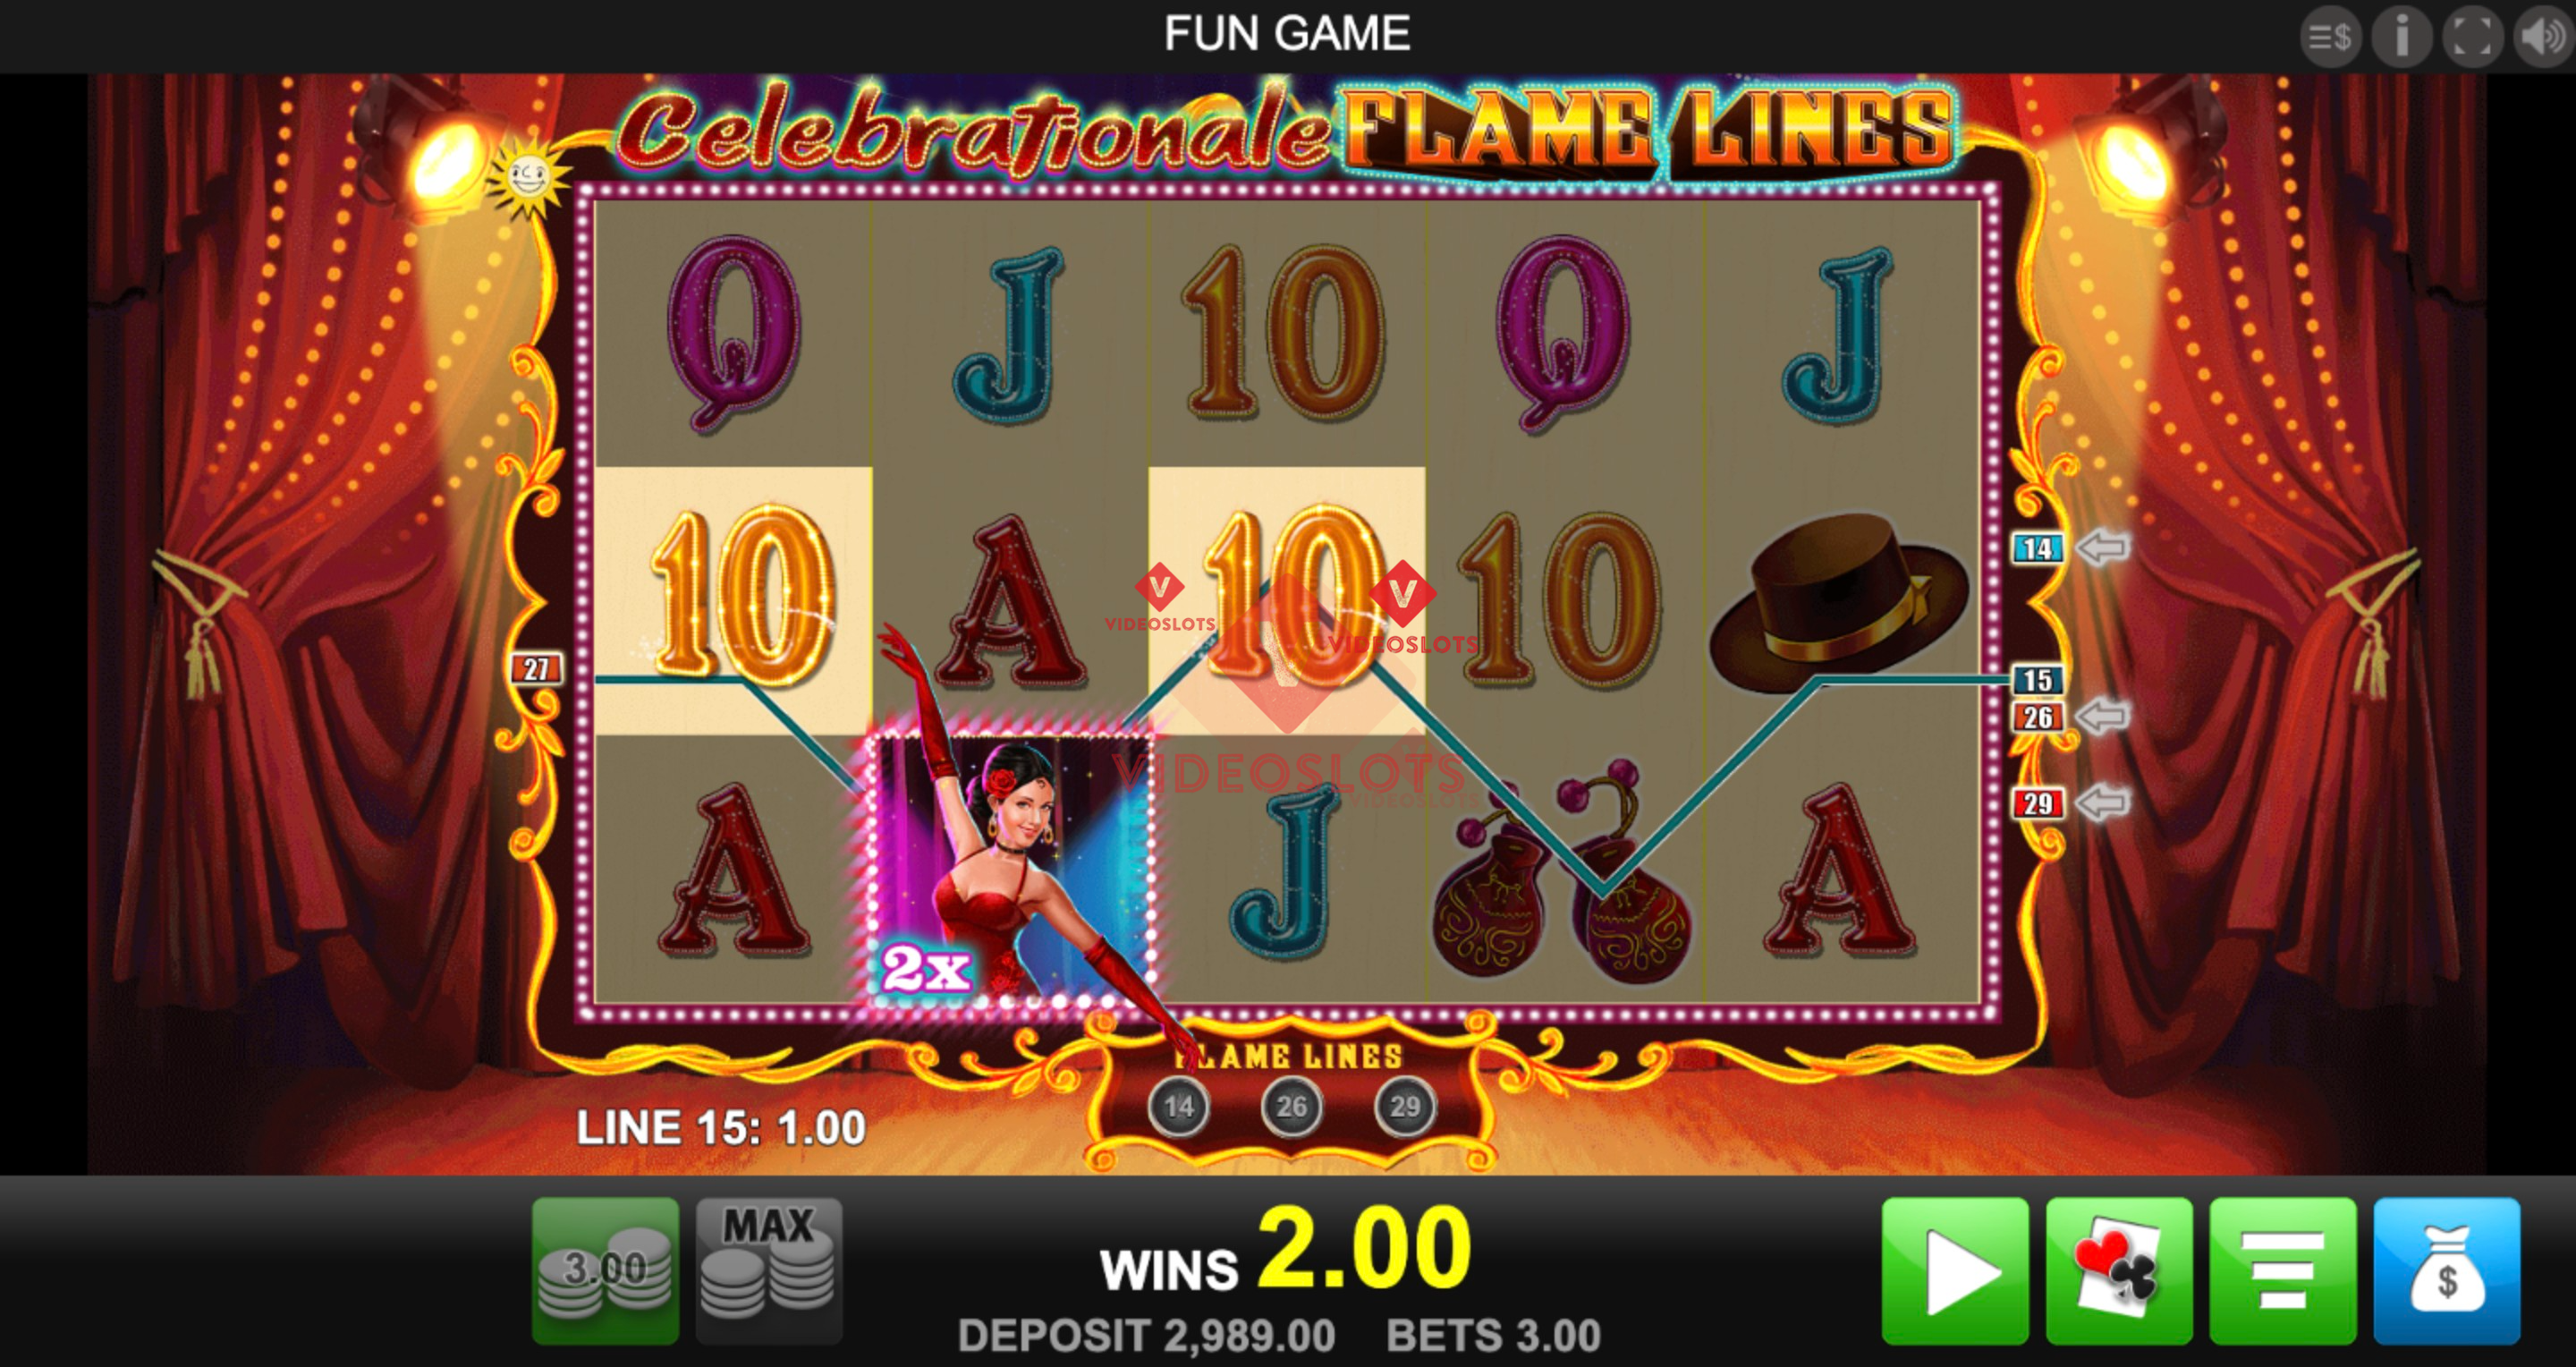 Base Game for Celebrationale Flame Lines slot from Merkur